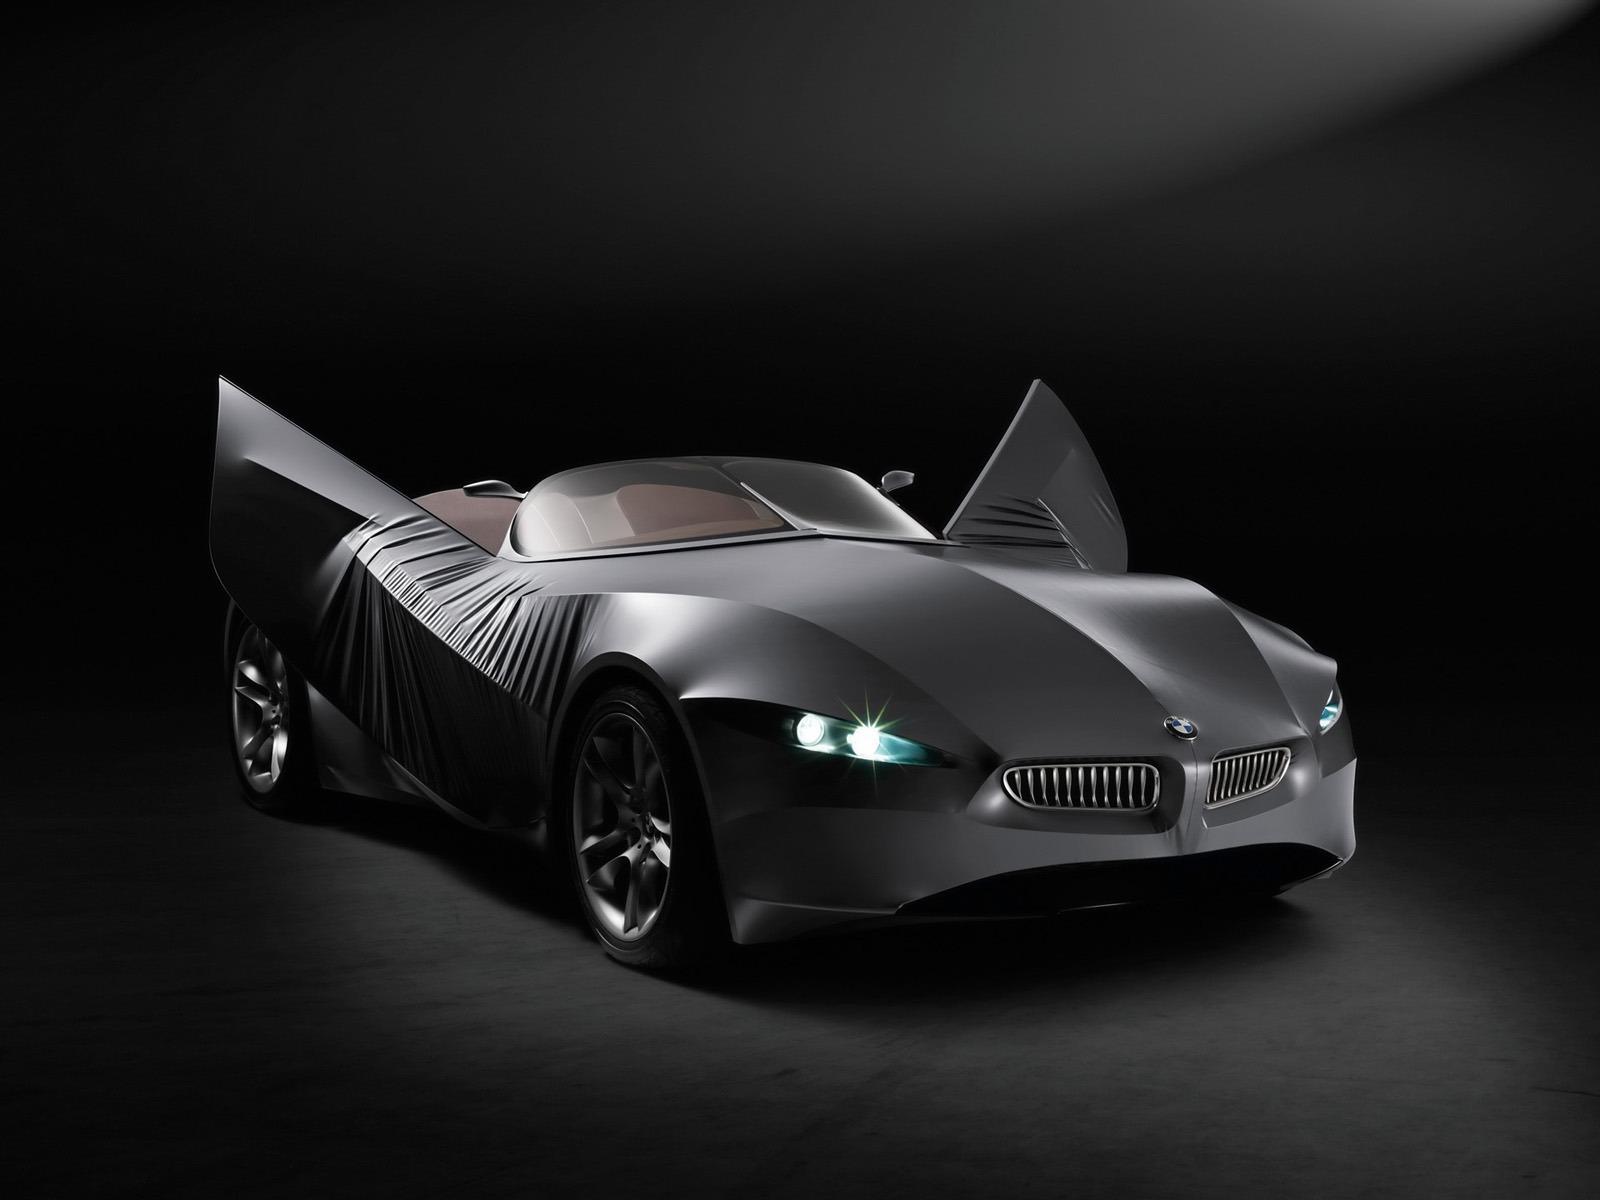 BMW Gina concept Wallpaper BMW Cars Wallpaper in jpg format